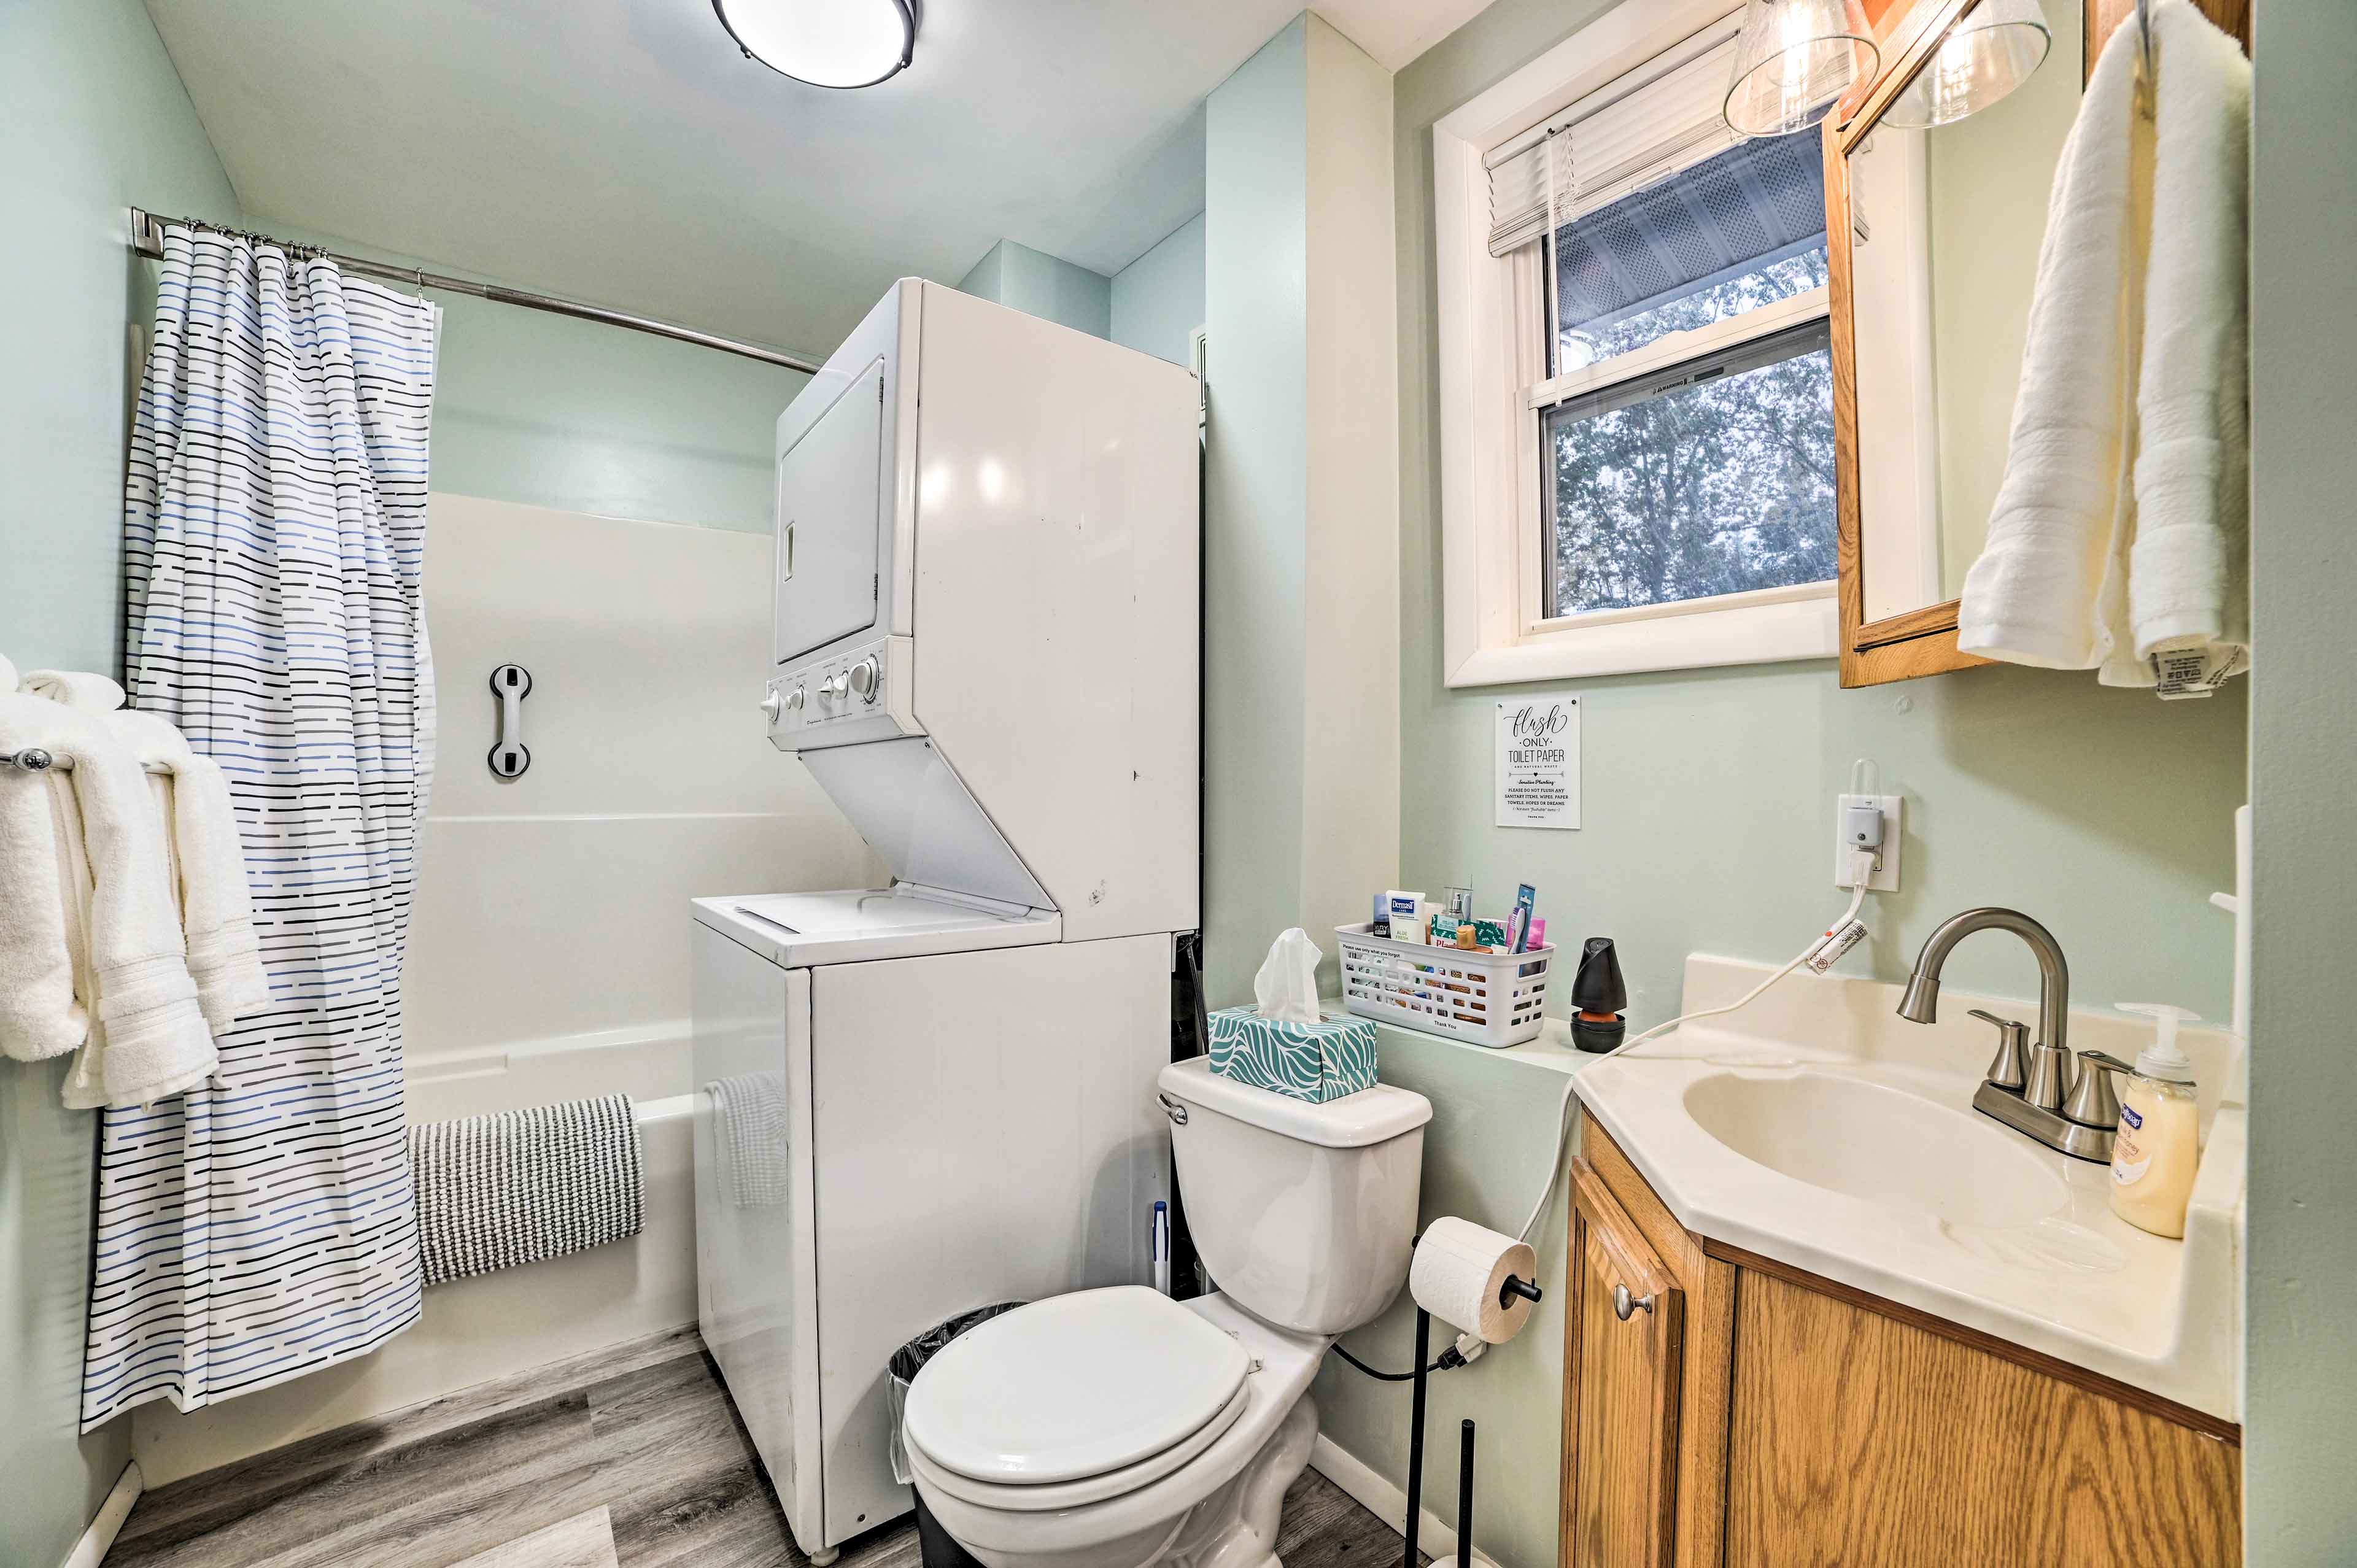 Full Bathroom | Complimentary Toiletries | Laundry | Detergent Provided